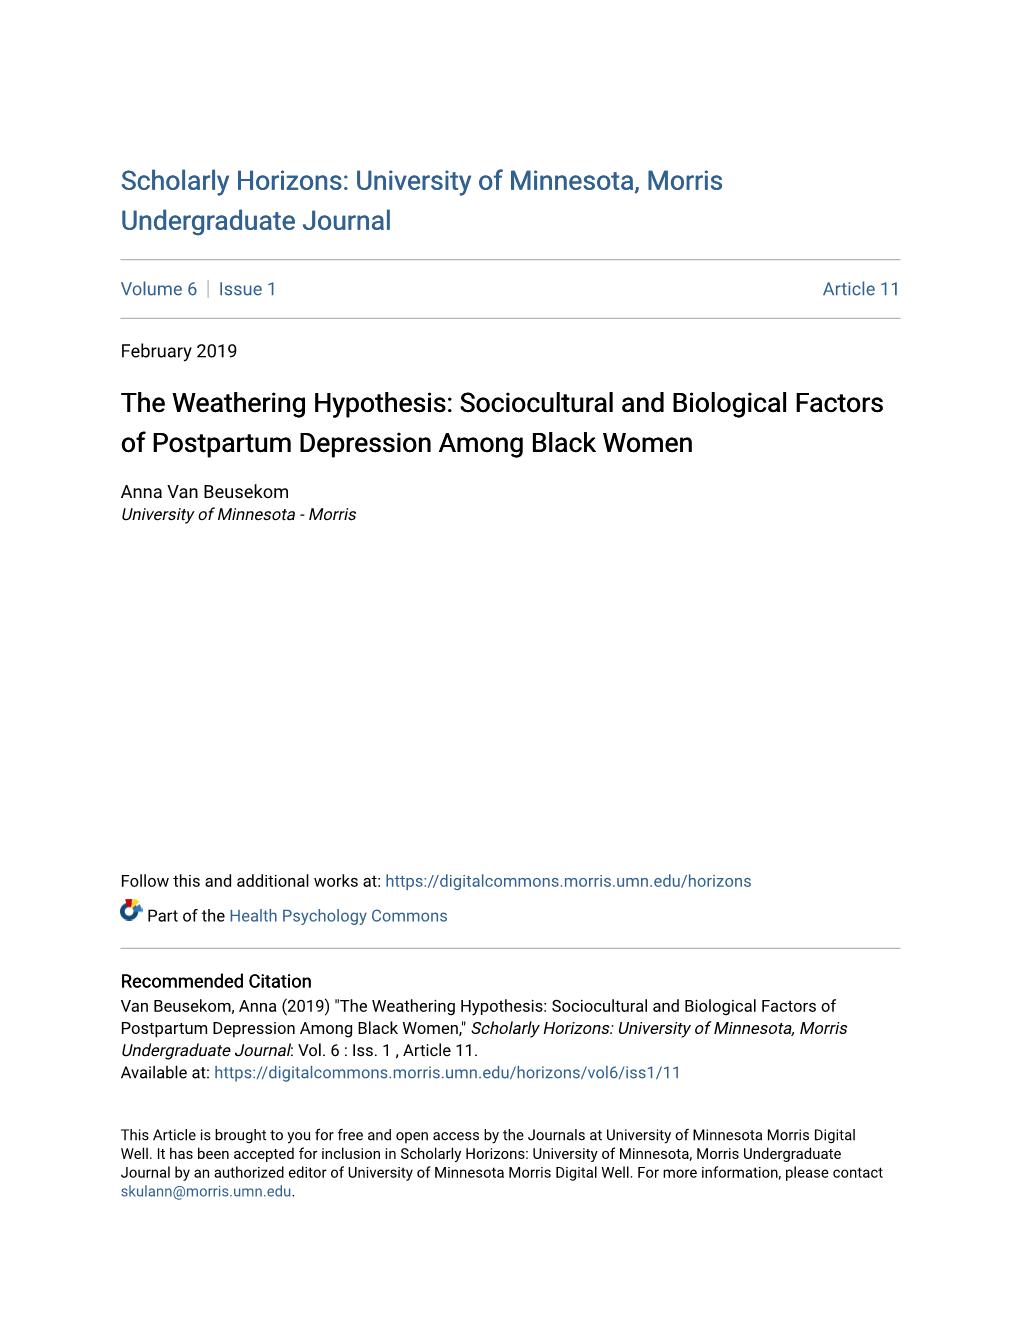 The Weathering Hypothesis: Sociocultural and Biological Factors of Postpartum Depression Among Black Women